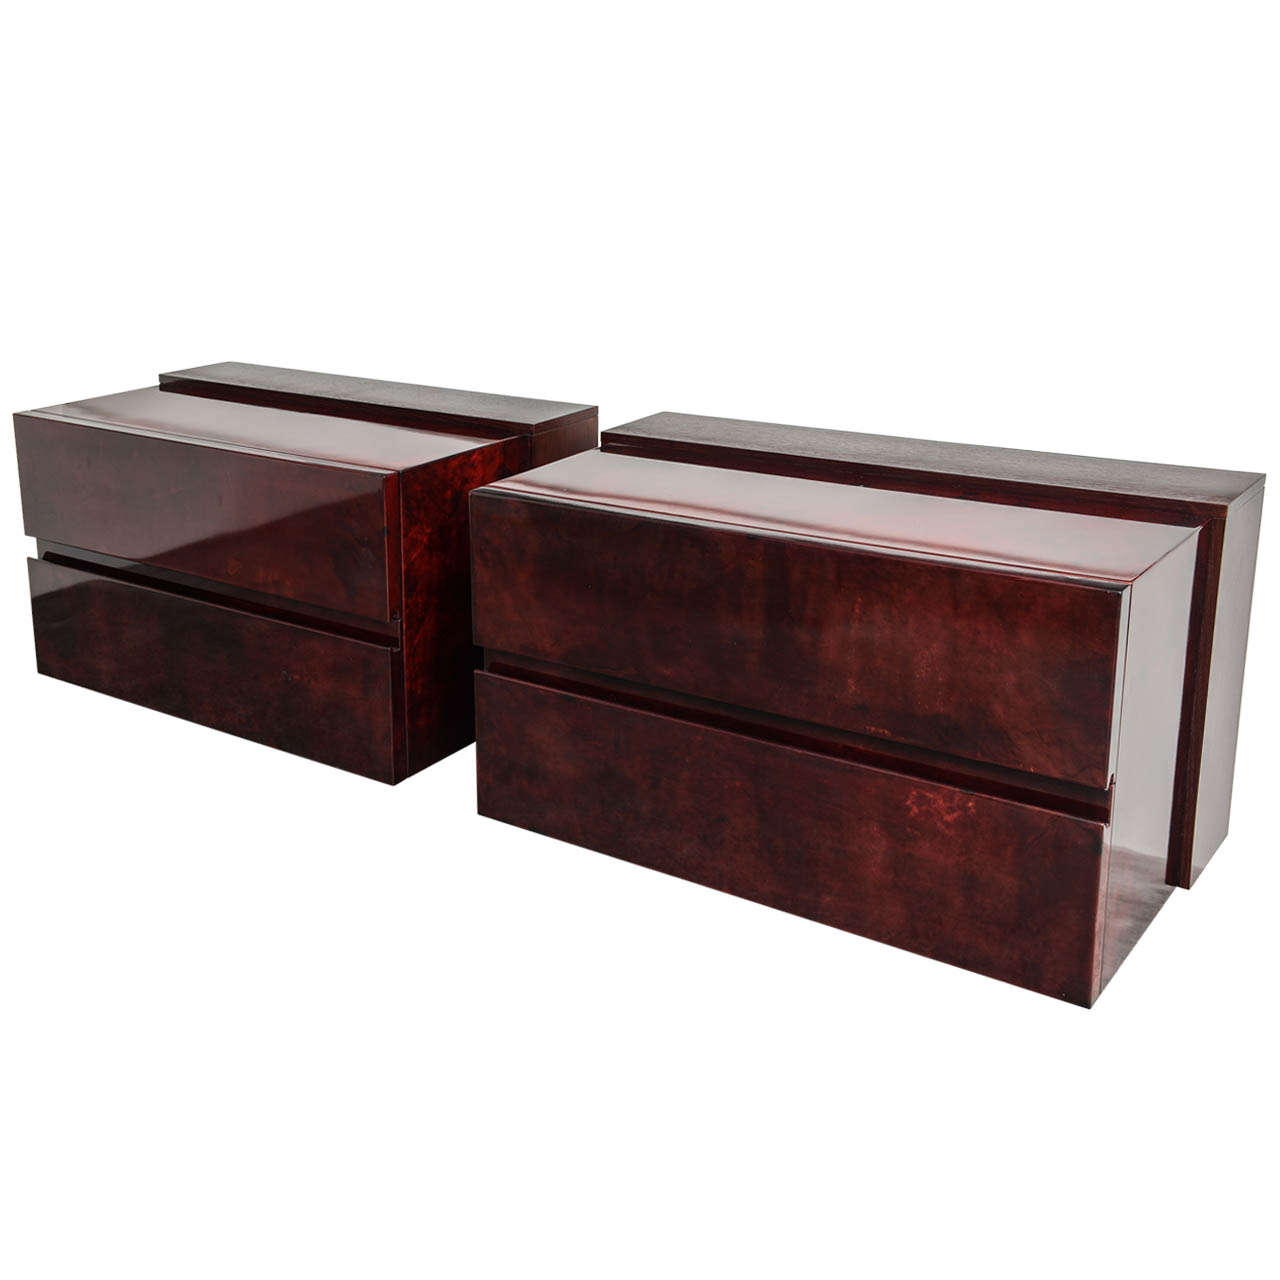 Pair Of Chest Of Drawers Designed By Aldo Tura